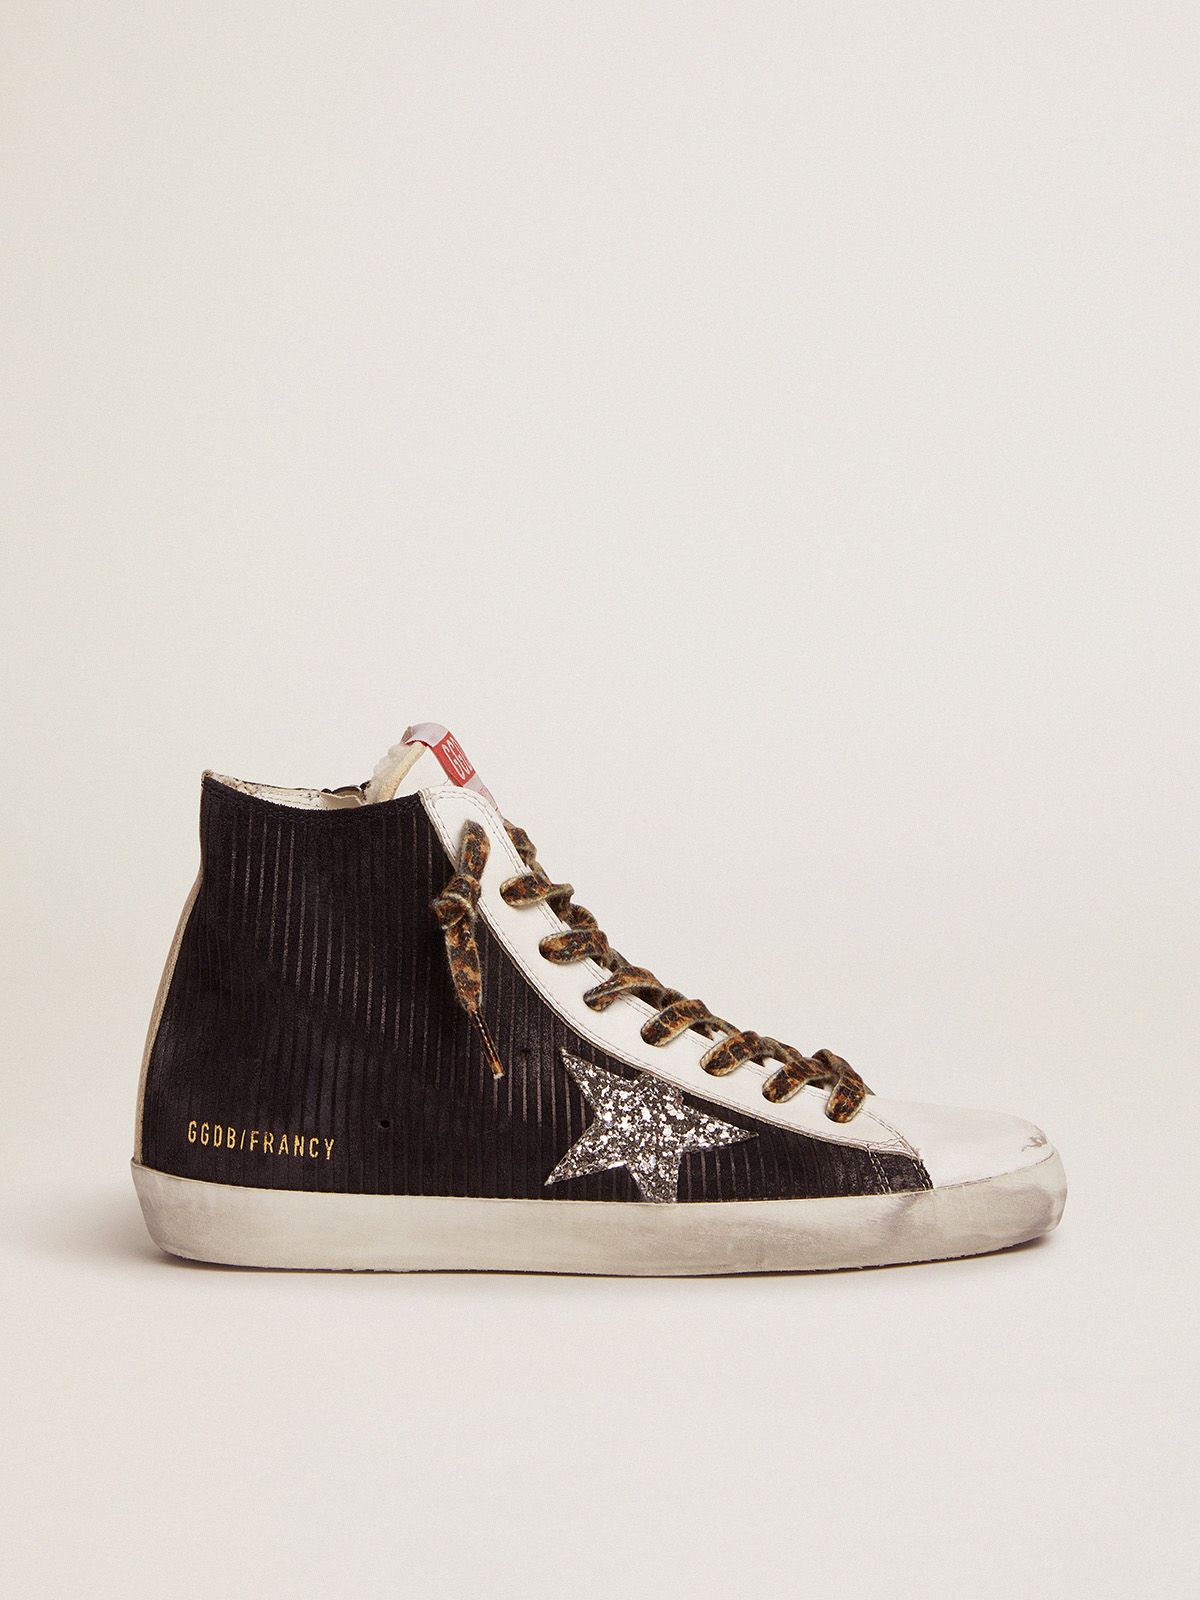 golden goose suede black in shearling lining and Francy sneakers corduroy print with